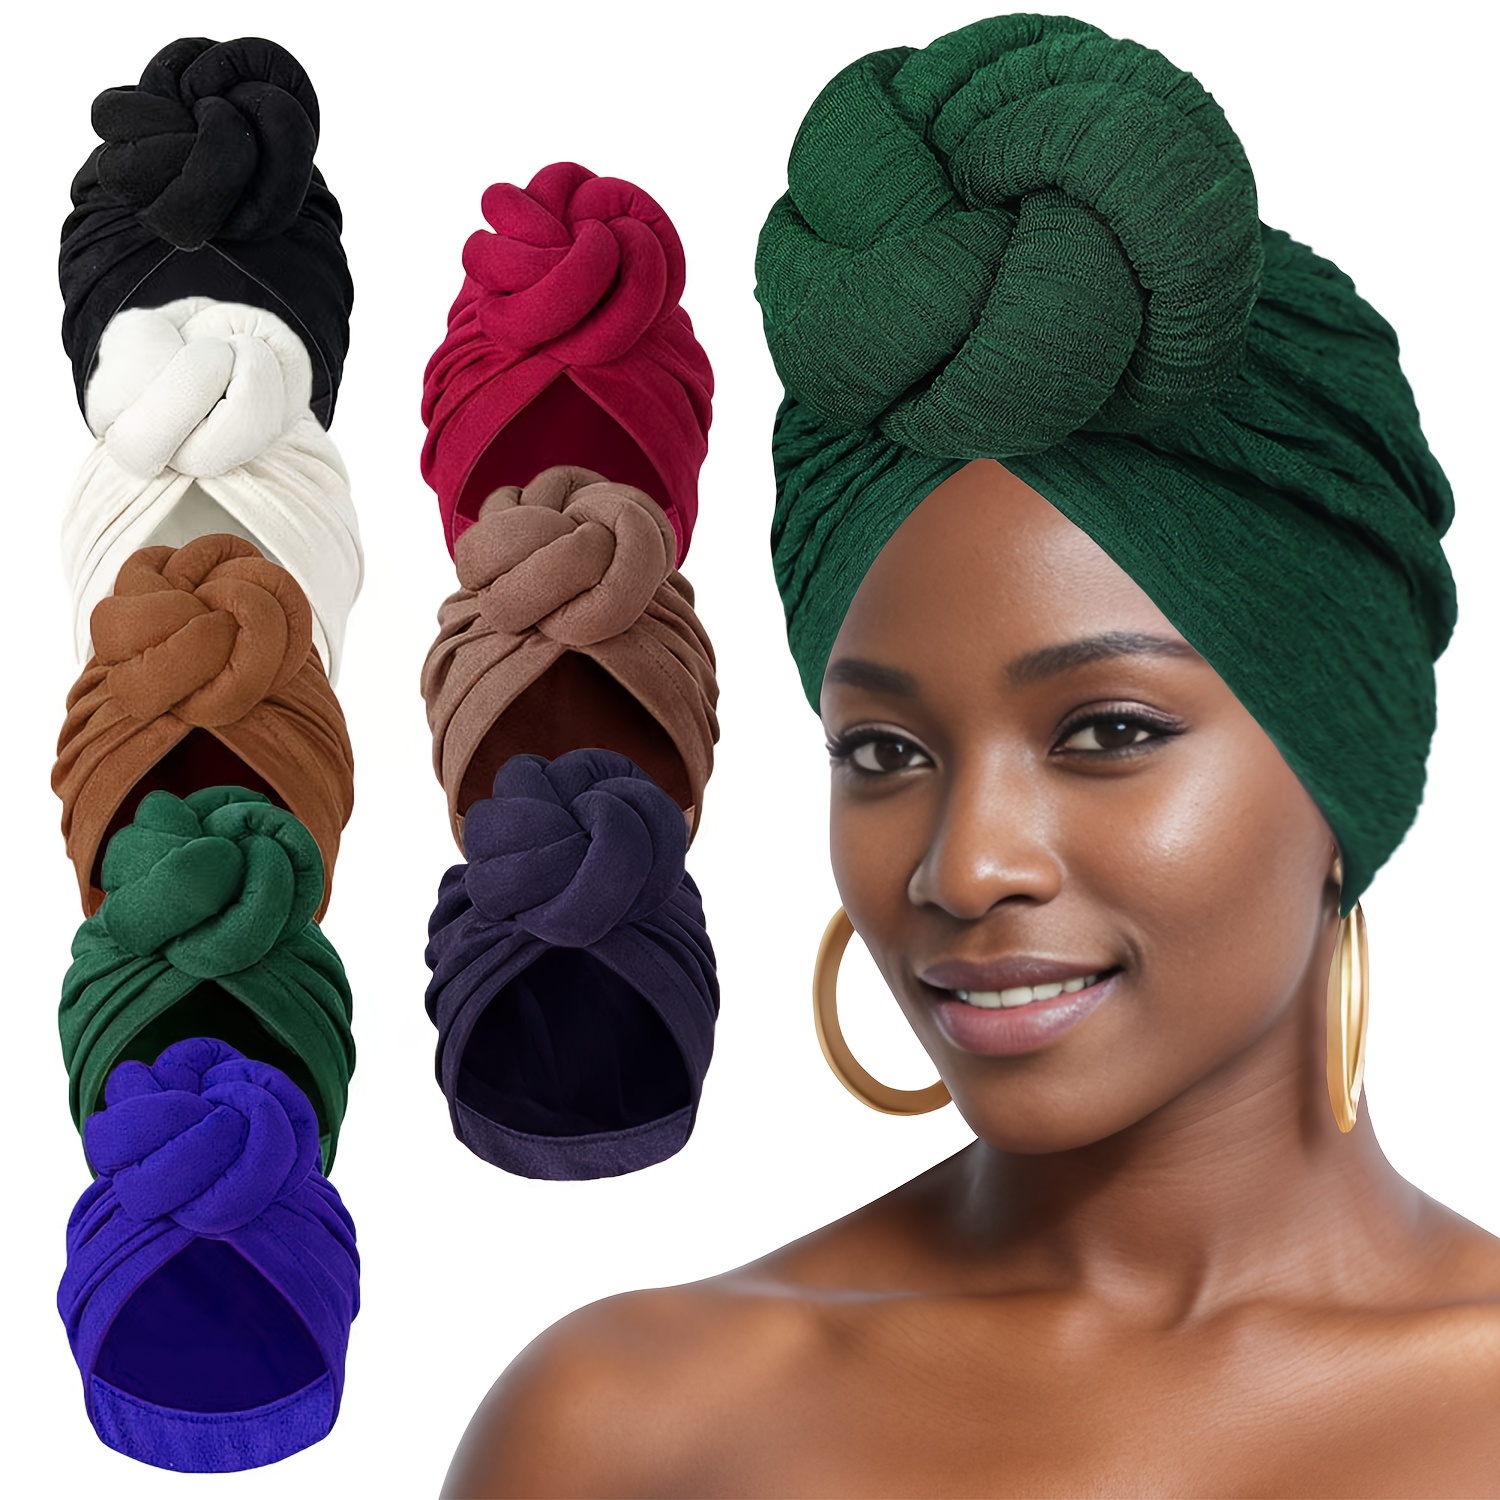 

Women's Solid Color Turbans With Front Handmade Knot, Fashion Chemo Caps, Casual Comfortable Breathable Premium Everyday Headwraps